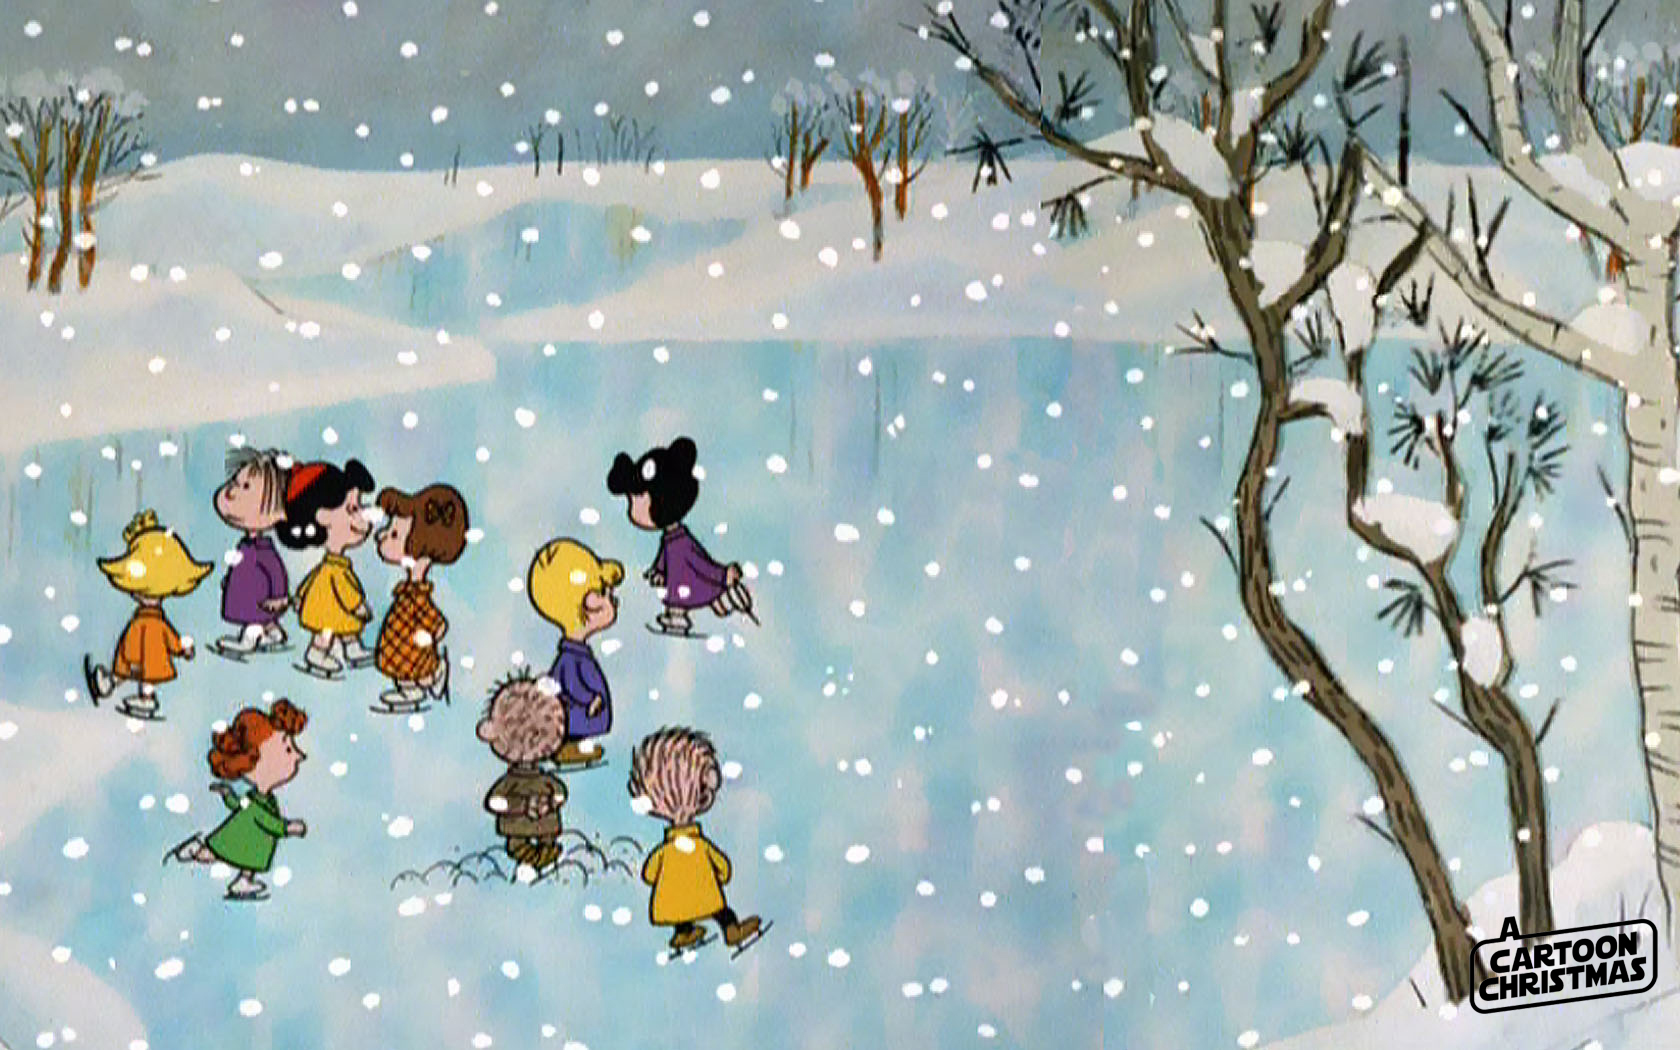 Charlie Brown Wallpaper And Screensaver Submited Image